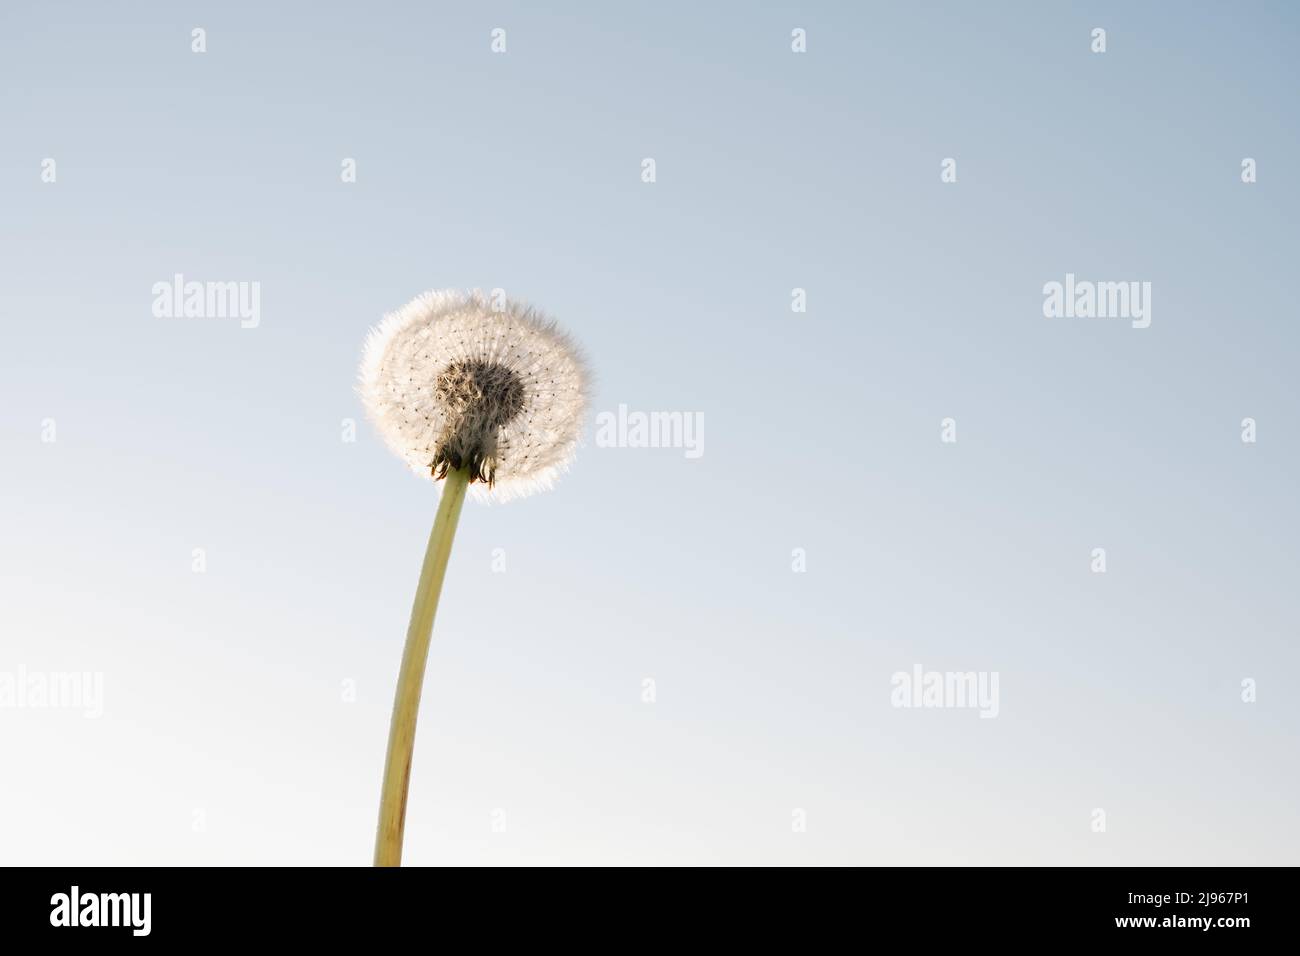 Fluffy single dandelion flower at clear blue sky background. Natural floral background Stock Photo